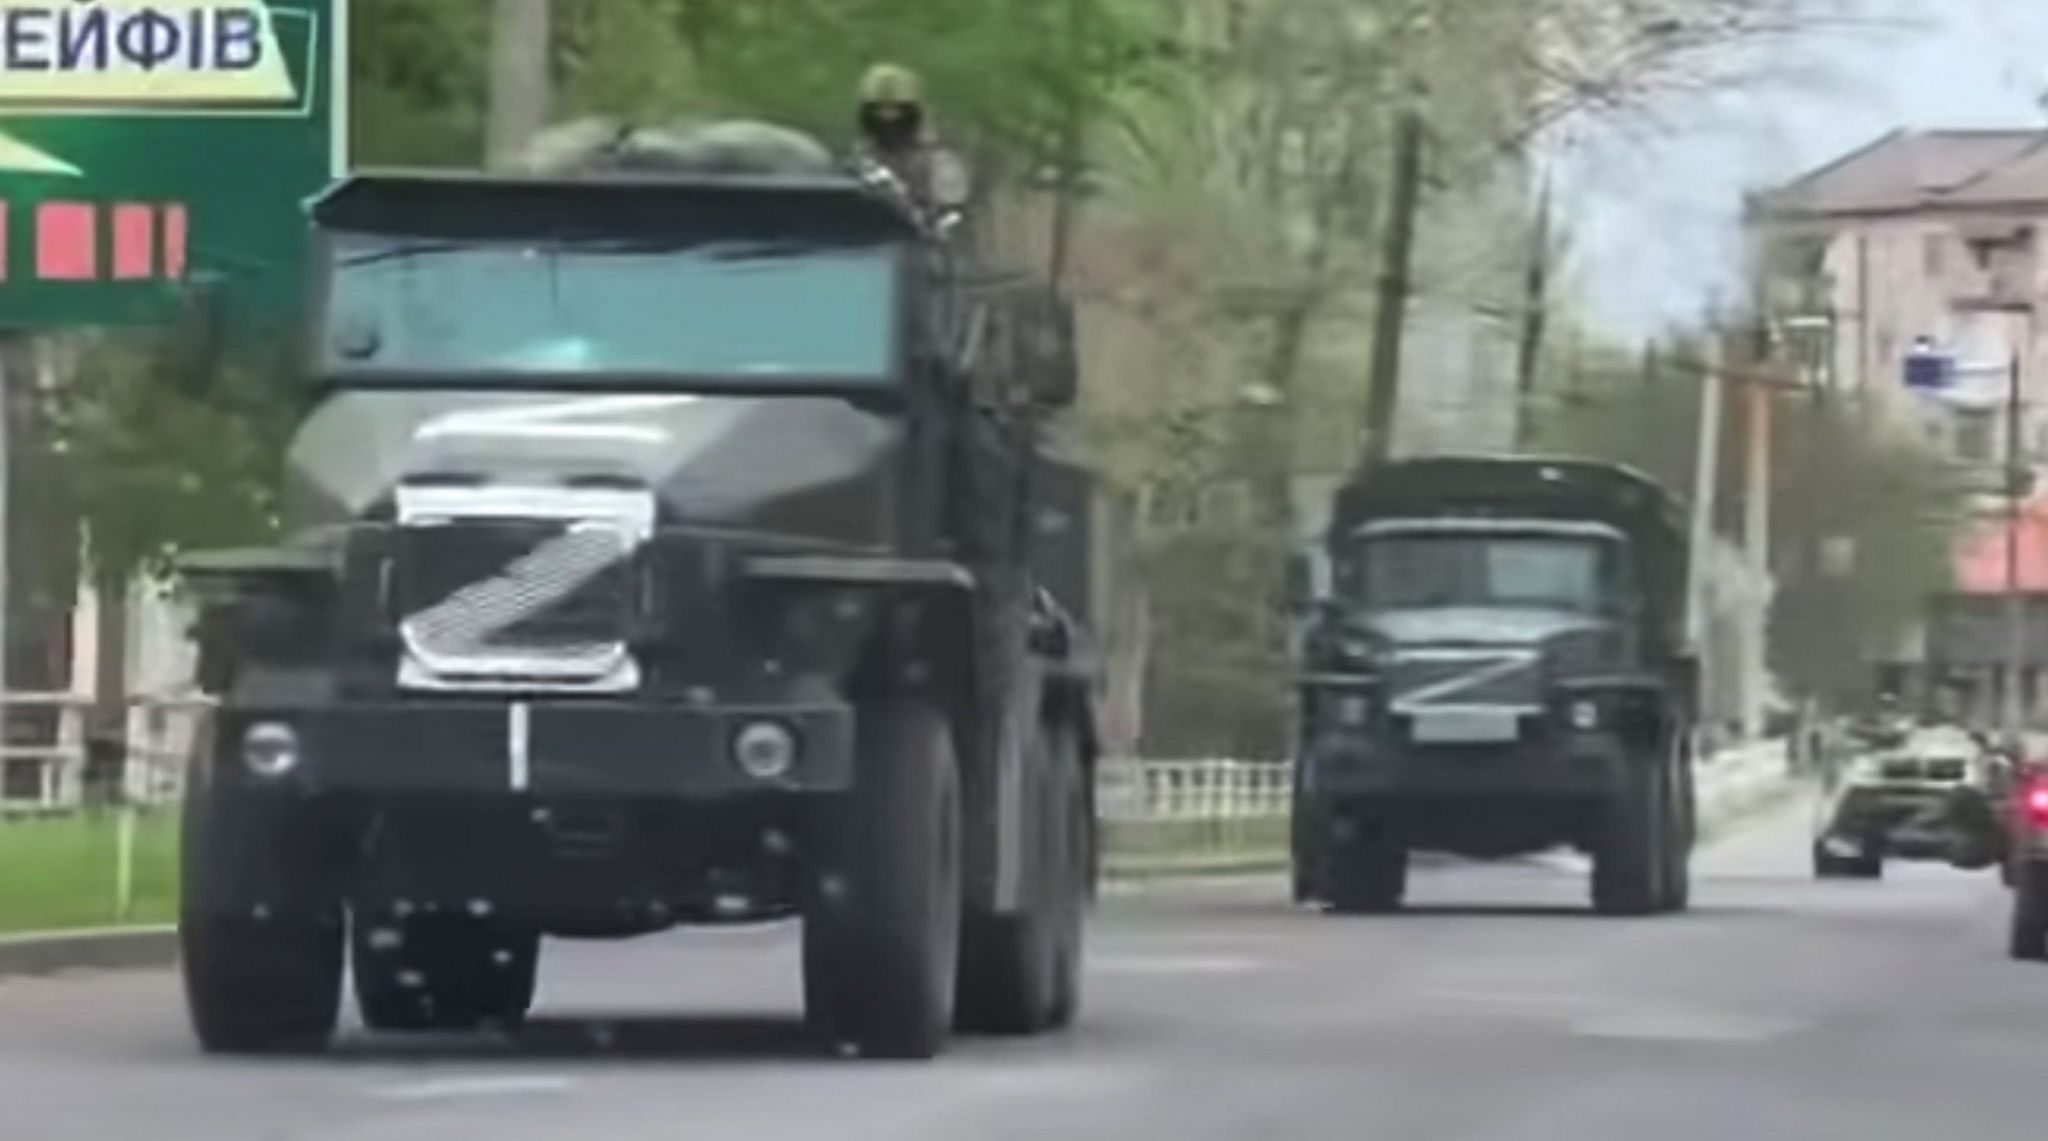 Large Russian Trucks with white Z painted on them drive down a street